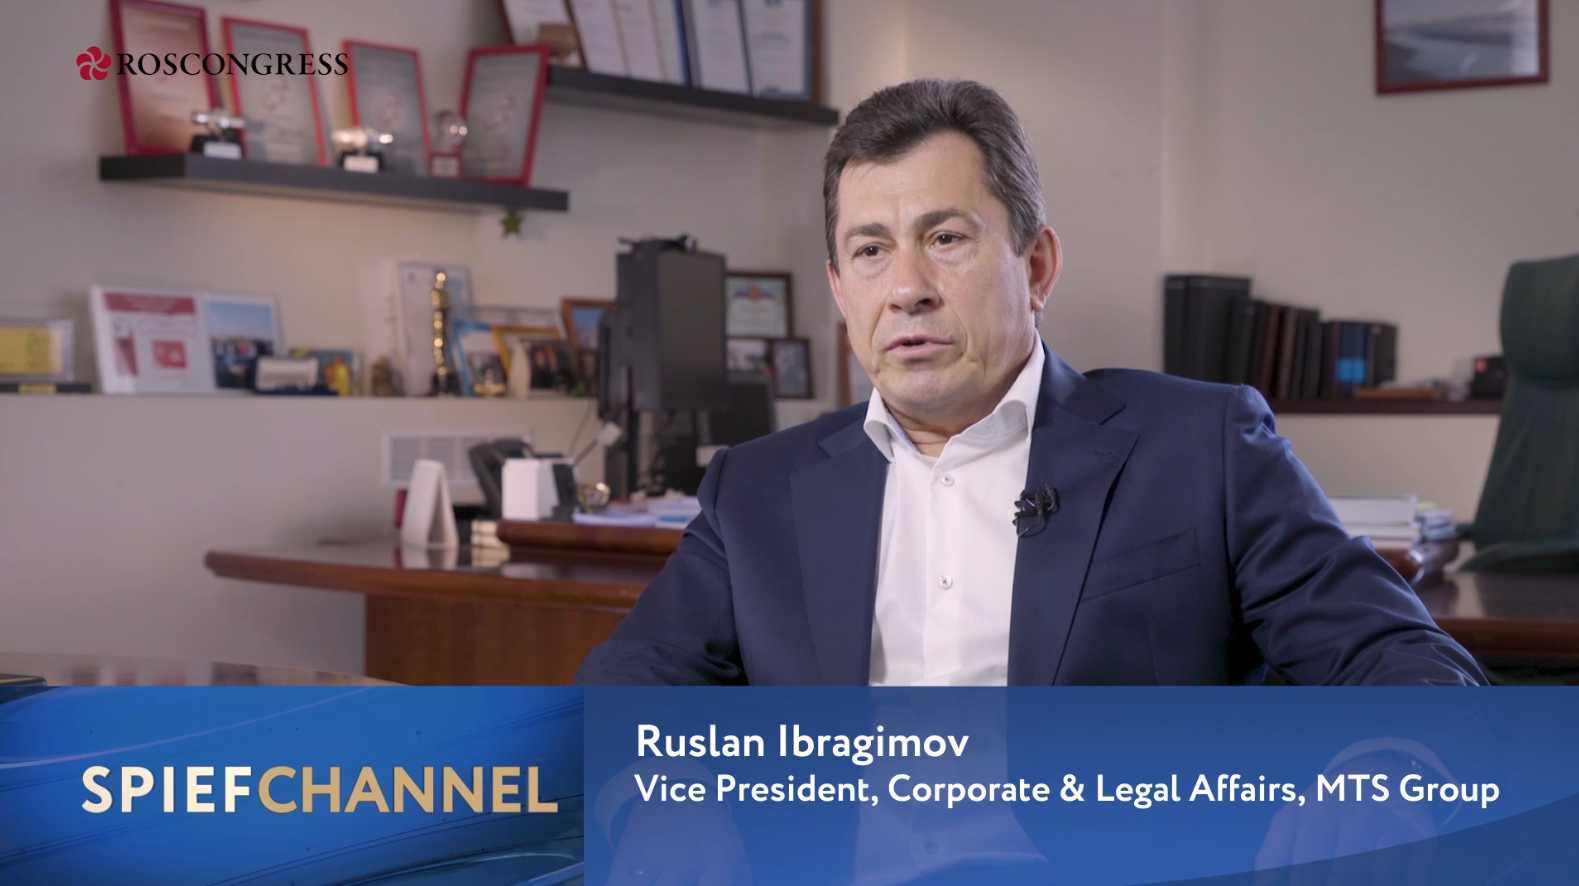 Ruslan Ibragimov, Vice President for Corporate and Legal Affairs, MTS PJSC